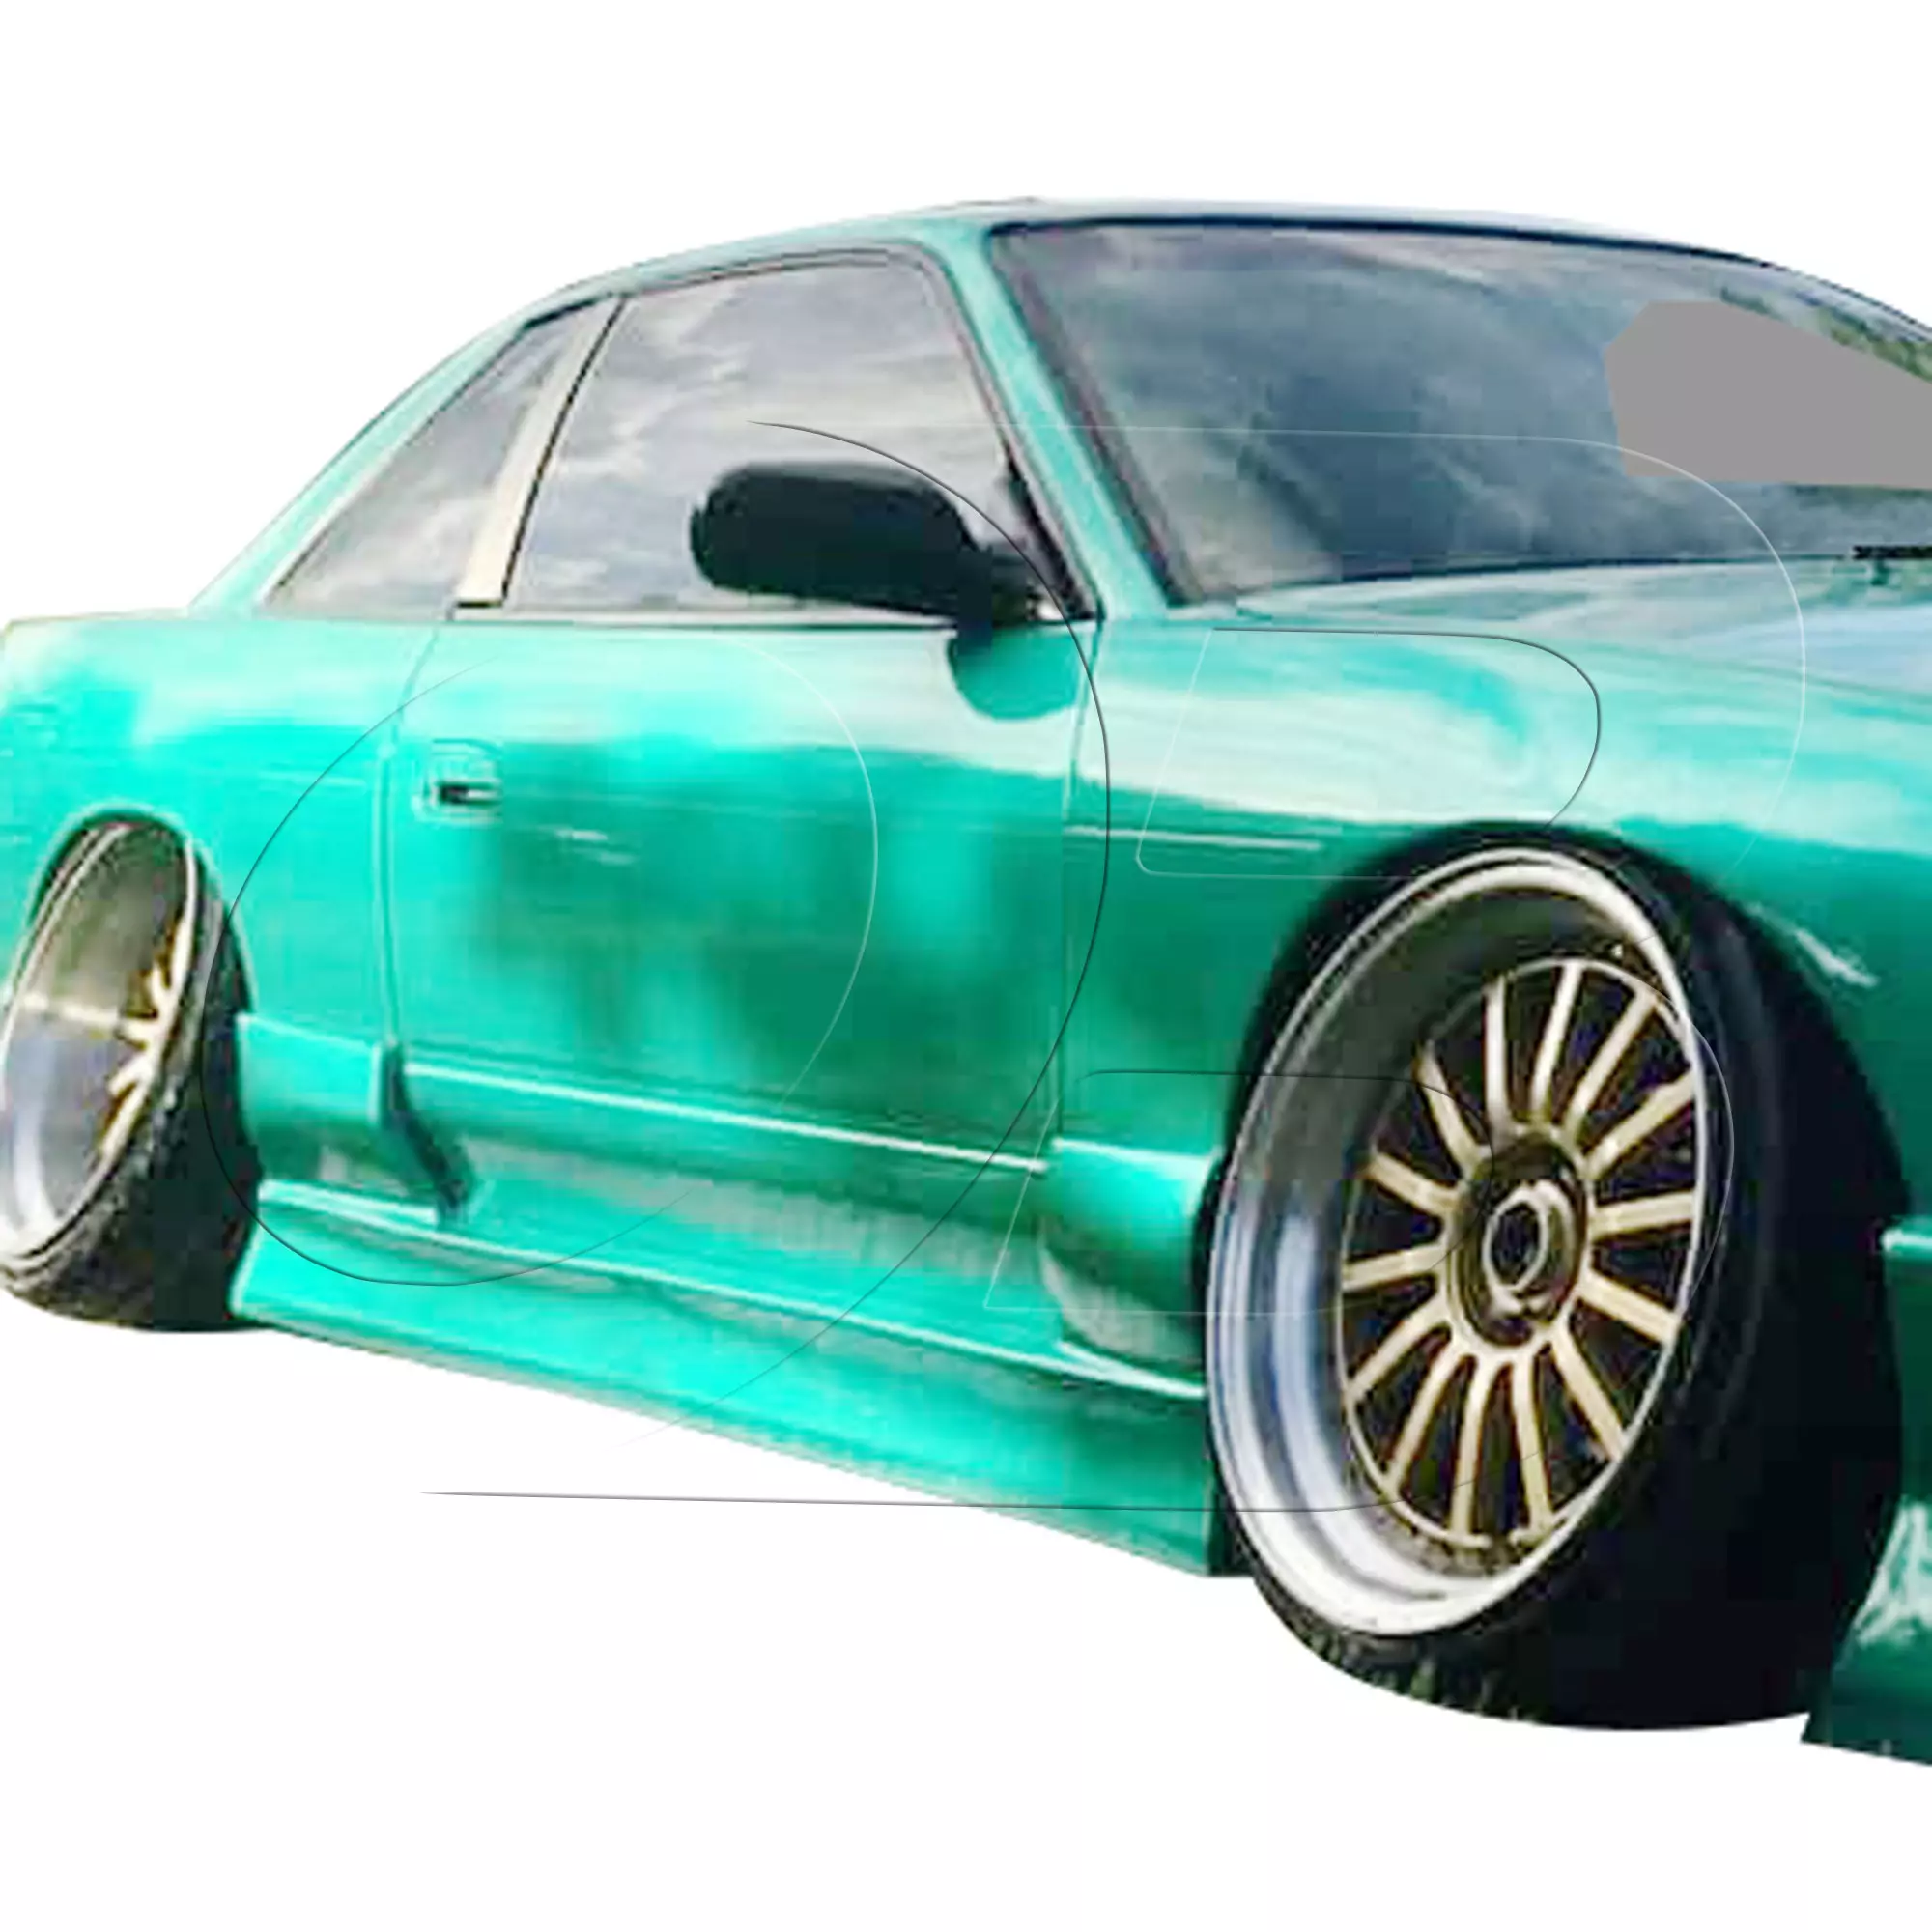 KBD Urethane Bsport2 Style 4pc Full Body Kit > Nissan 240SX 1989-1994 > 2dr Coupe - Image 48